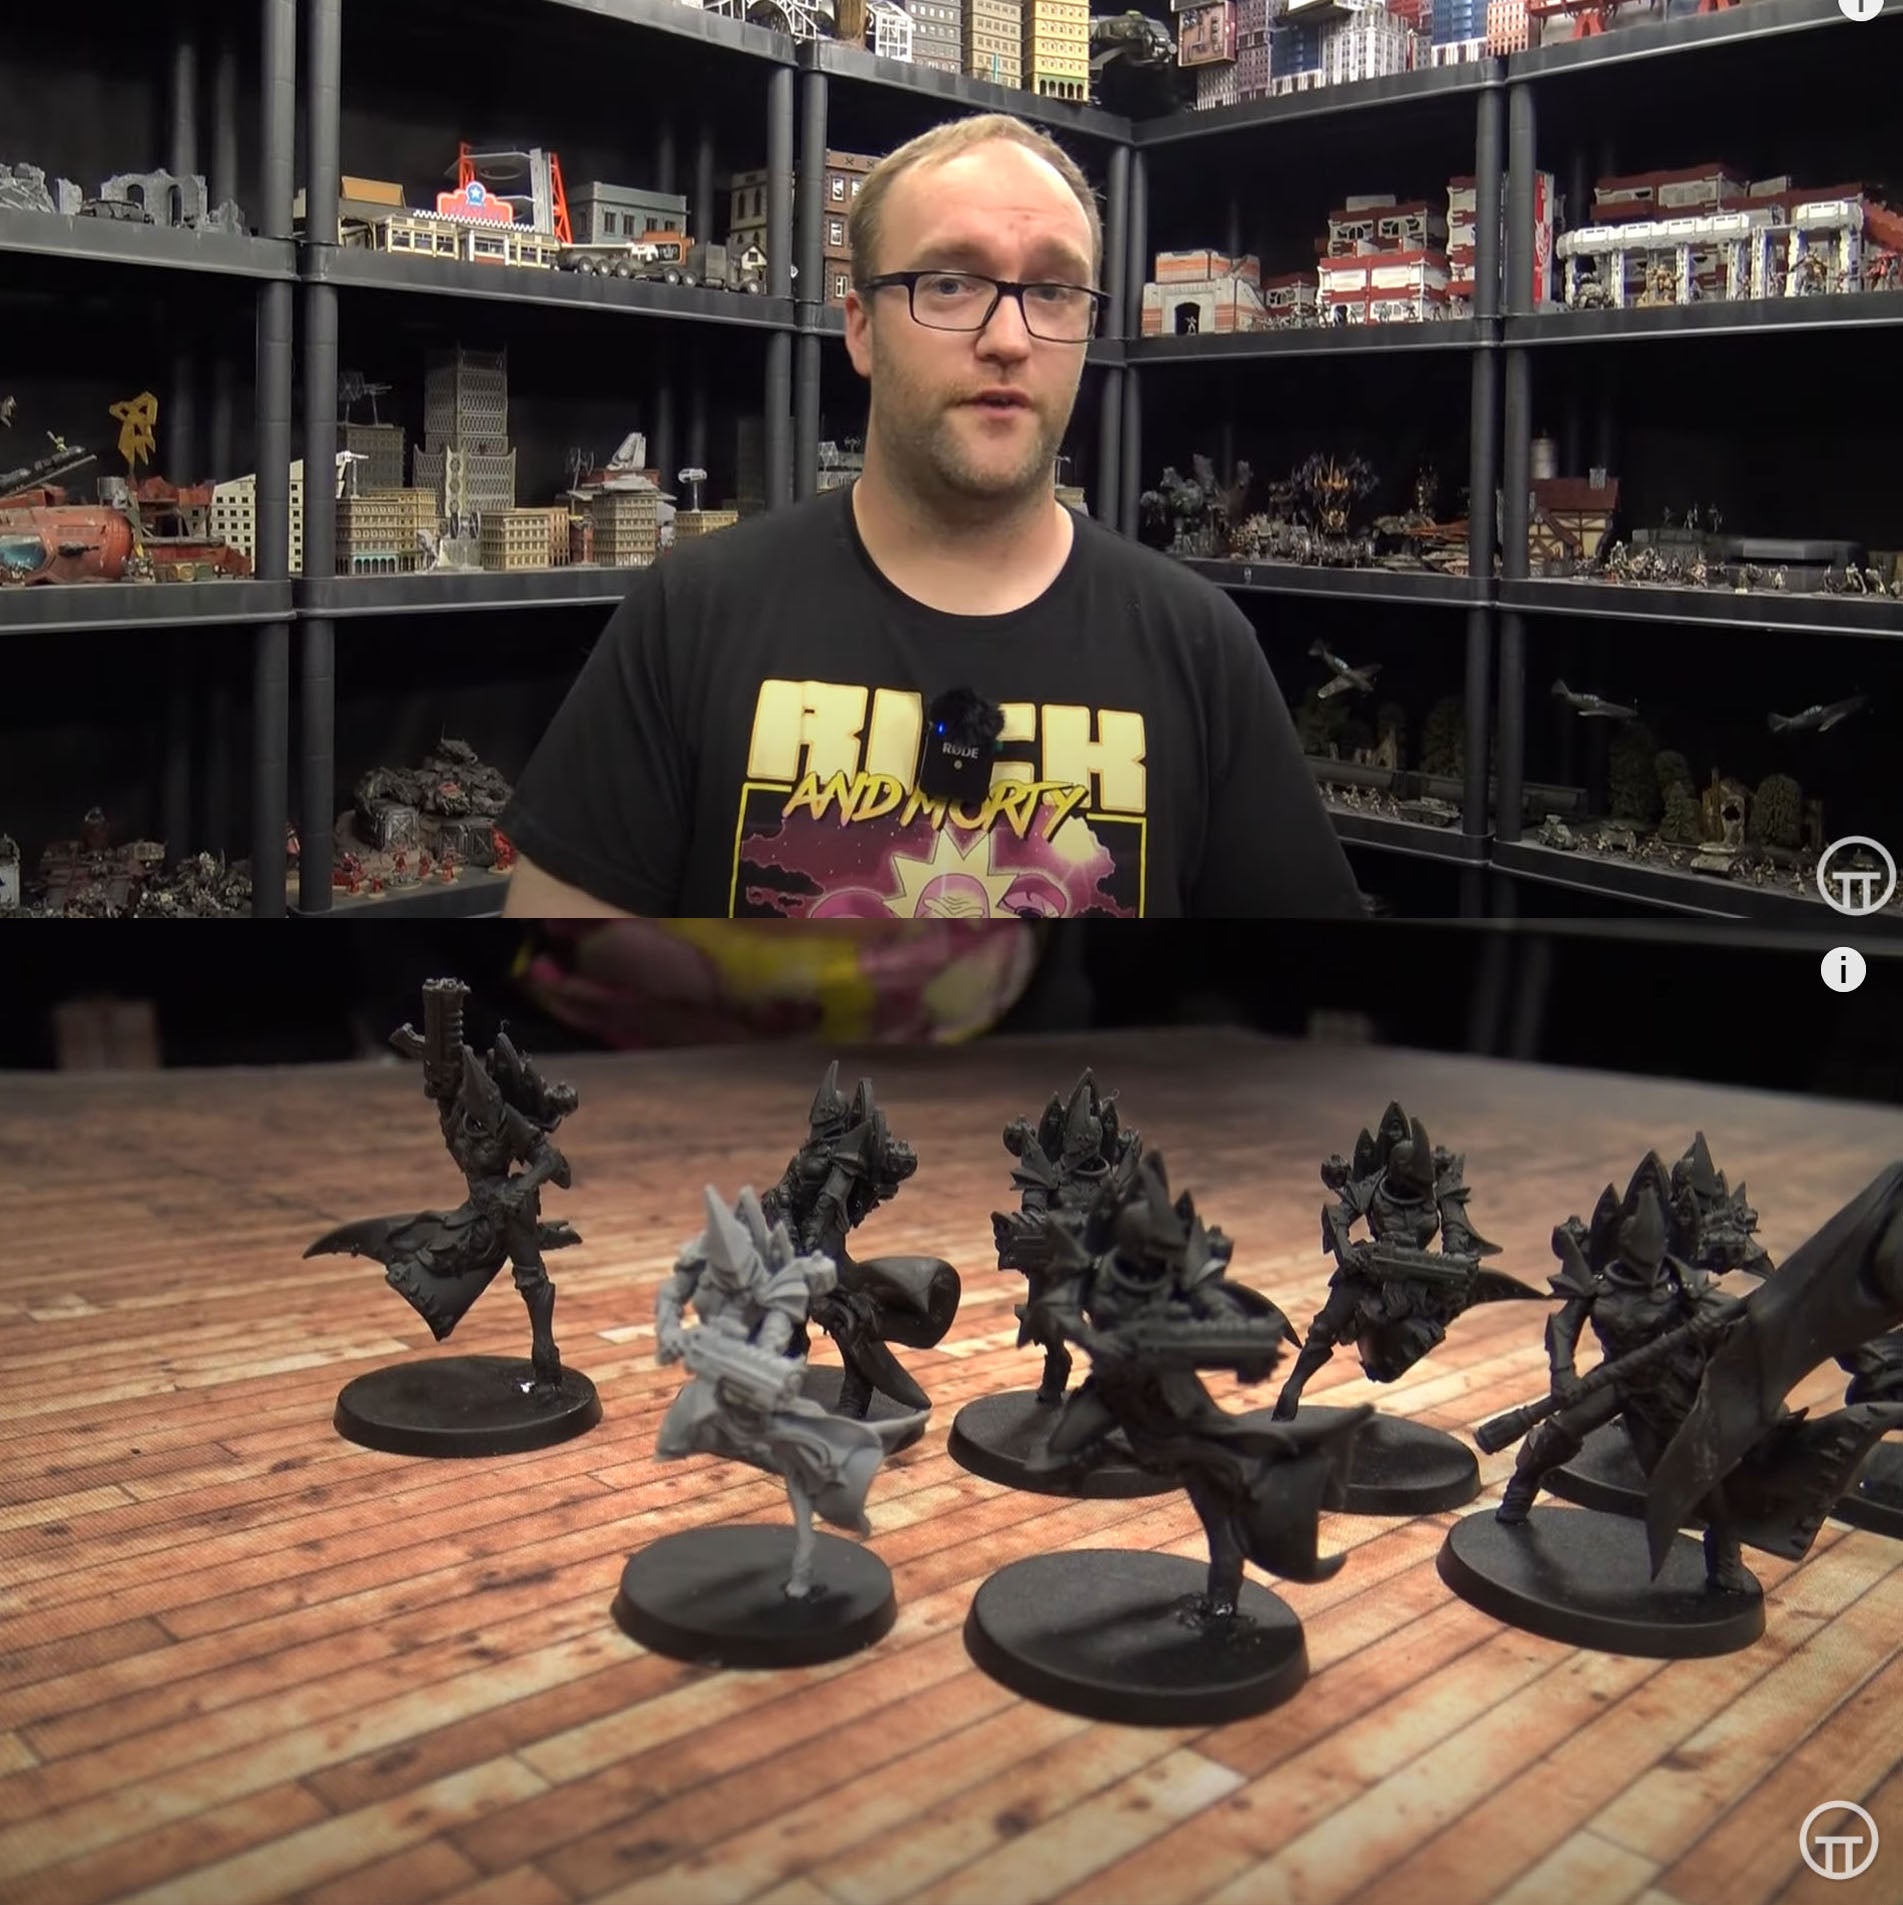 On Table Top Video: John compares the old and new Exemplar models!